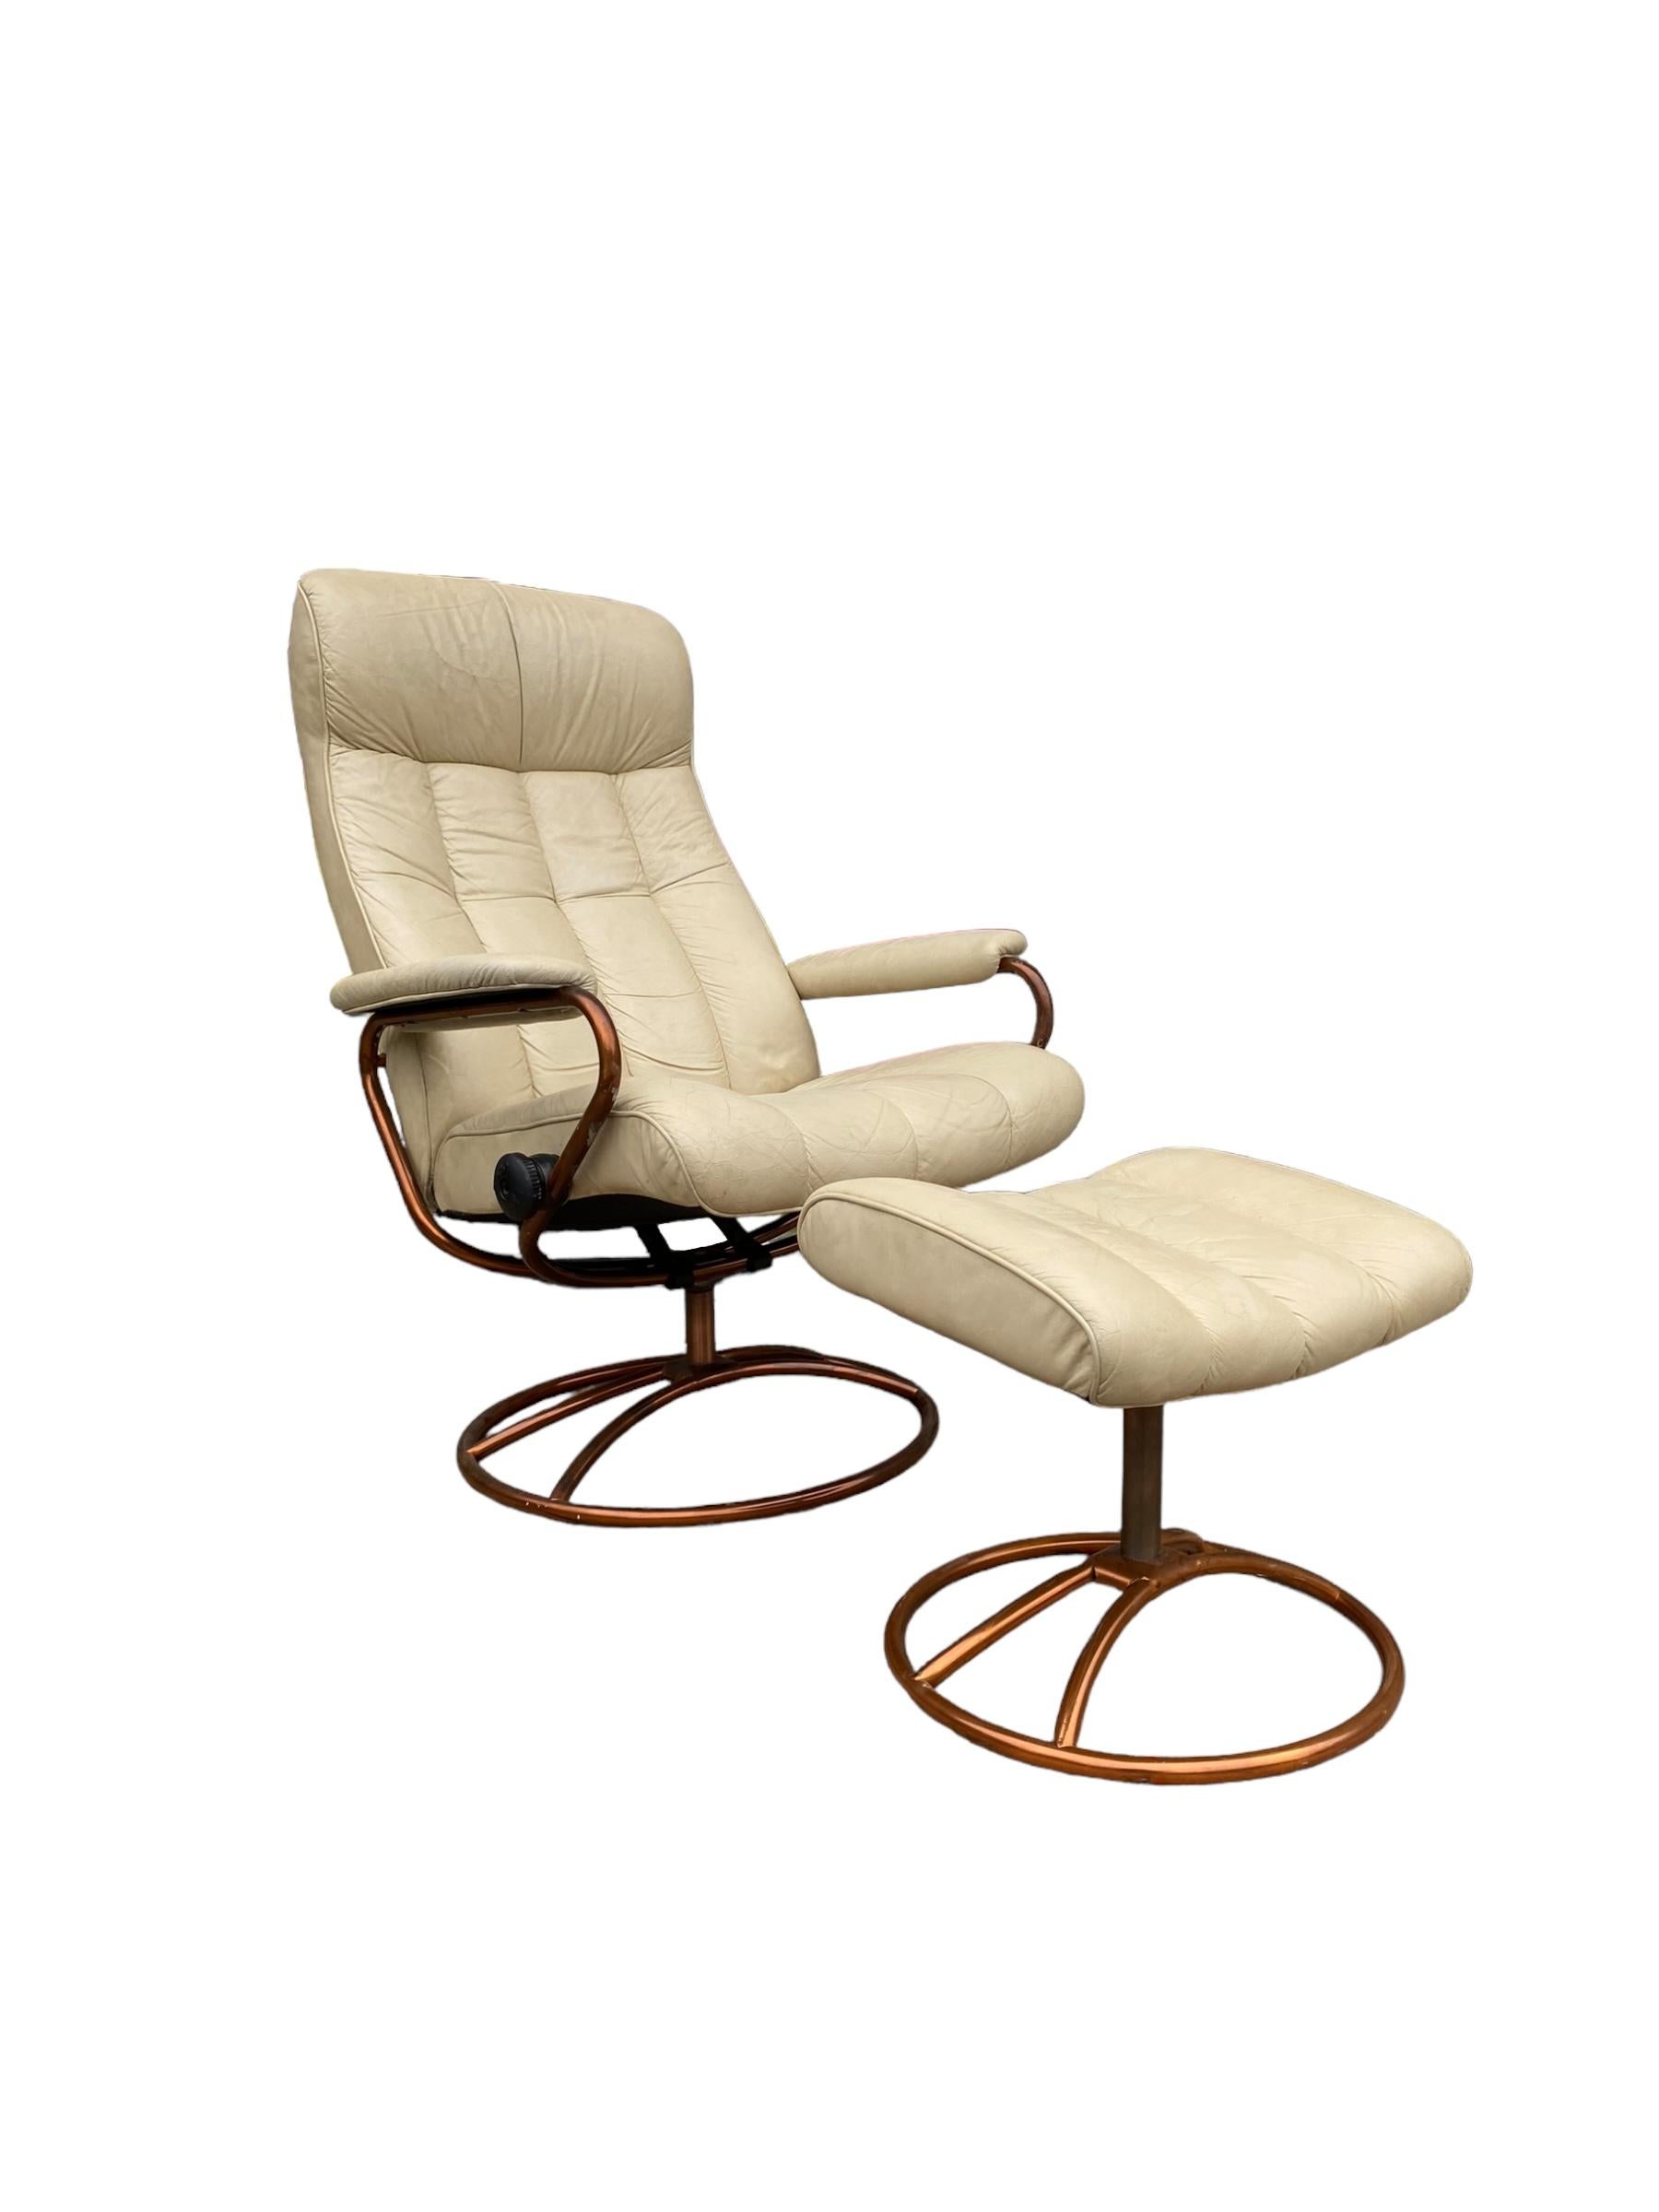 Vintage post modern Ekornes Stressless Lounge Chair and Ottoman in off white leather cream and a copper plated steel frame. The chair can swivel and recline fully for a zero gravity feeling. Elegant, classic Scandinavian modern design for maximum